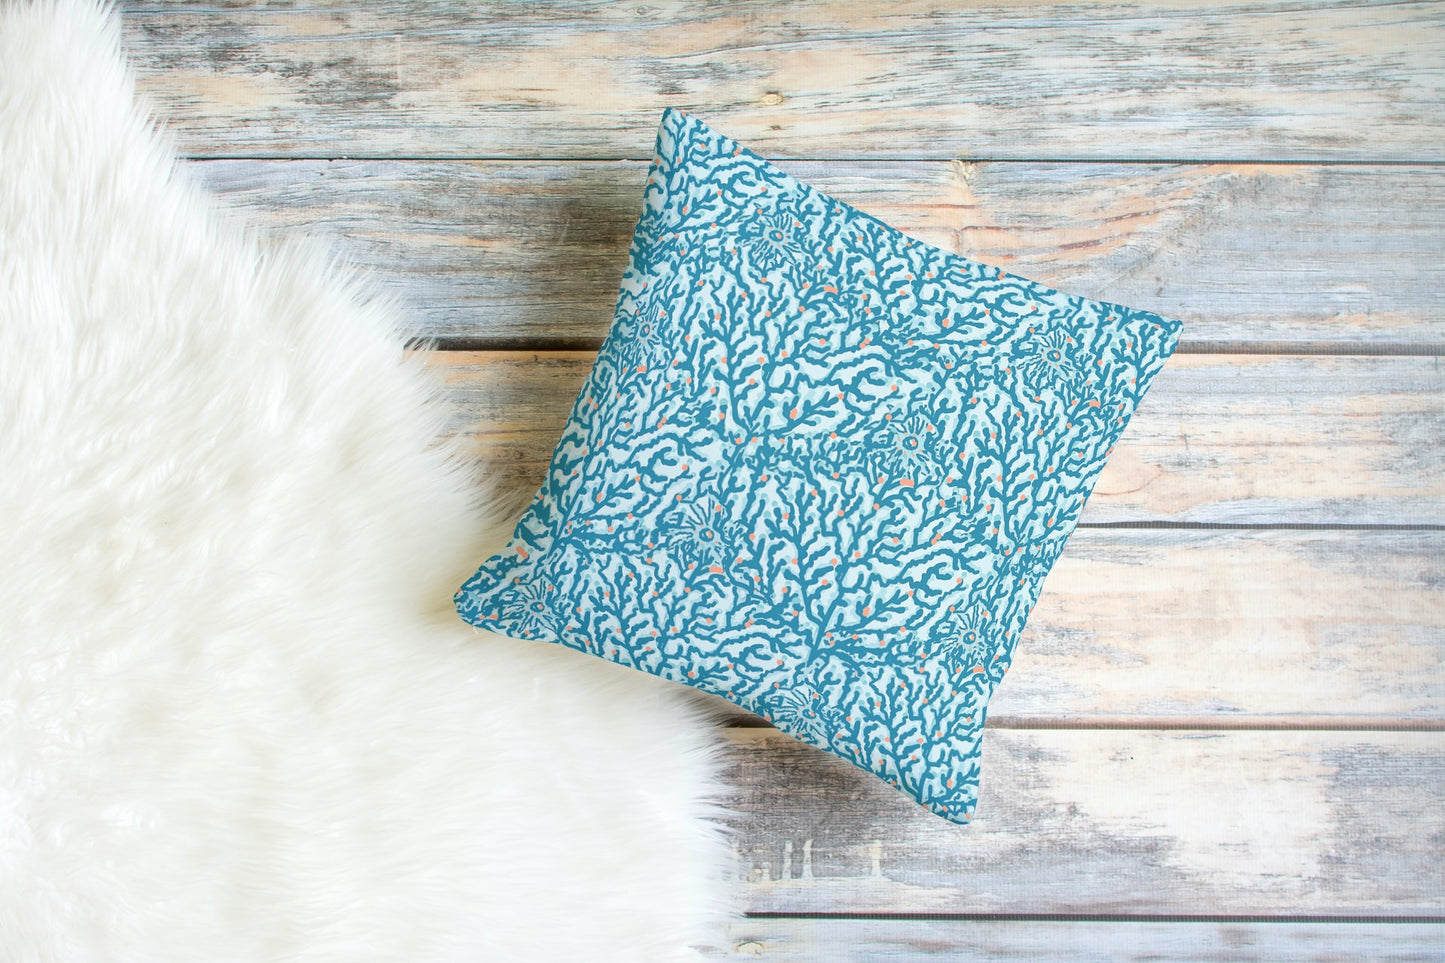 Azure Coral Outdoor Pillows Turquoise